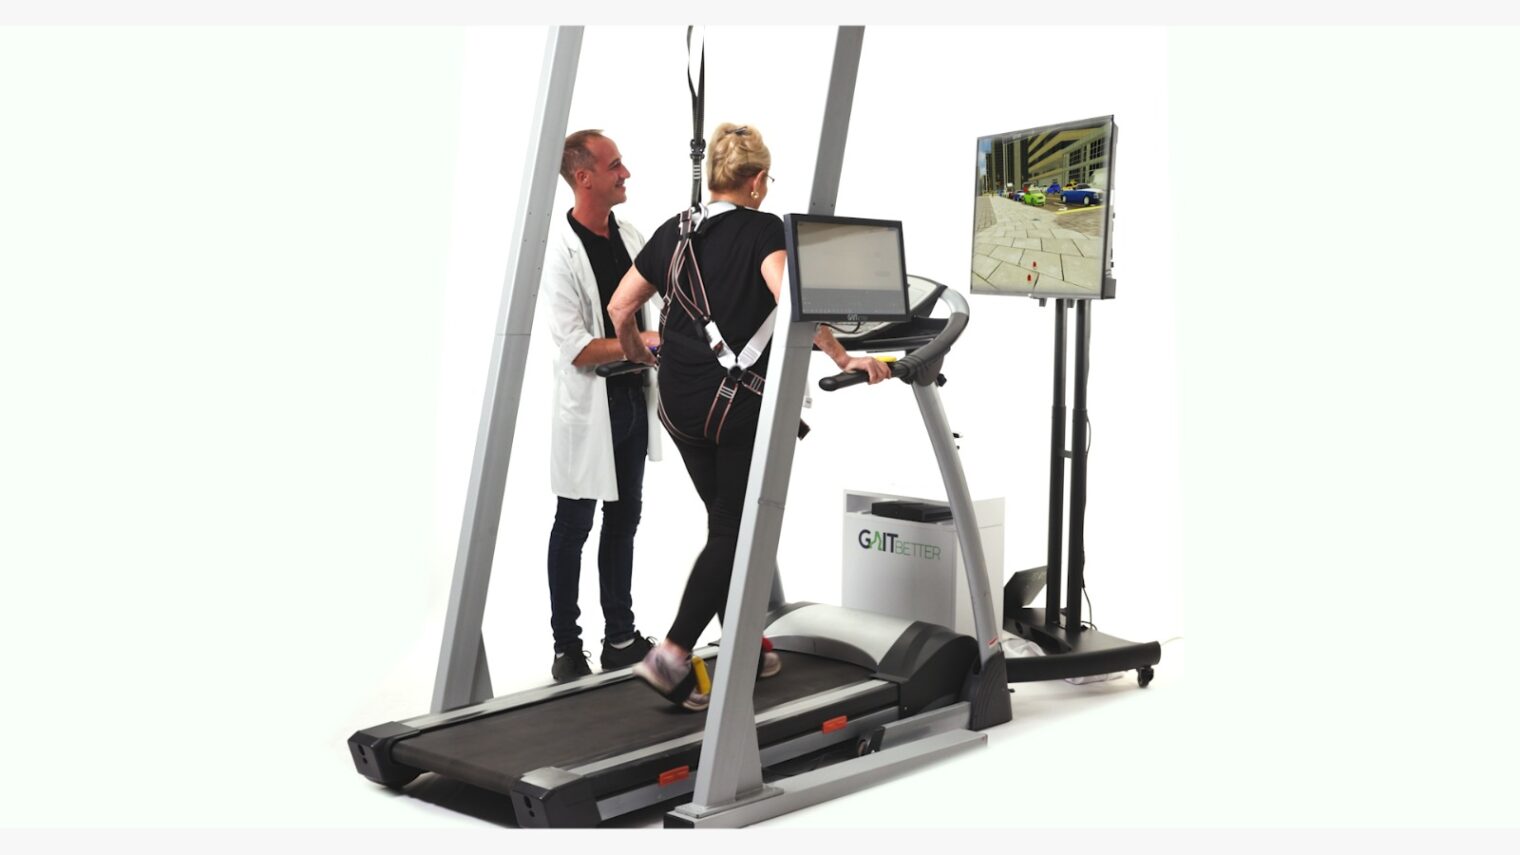 Gait analysis and training with a VR touch. Photo courtesy of GaitBetter